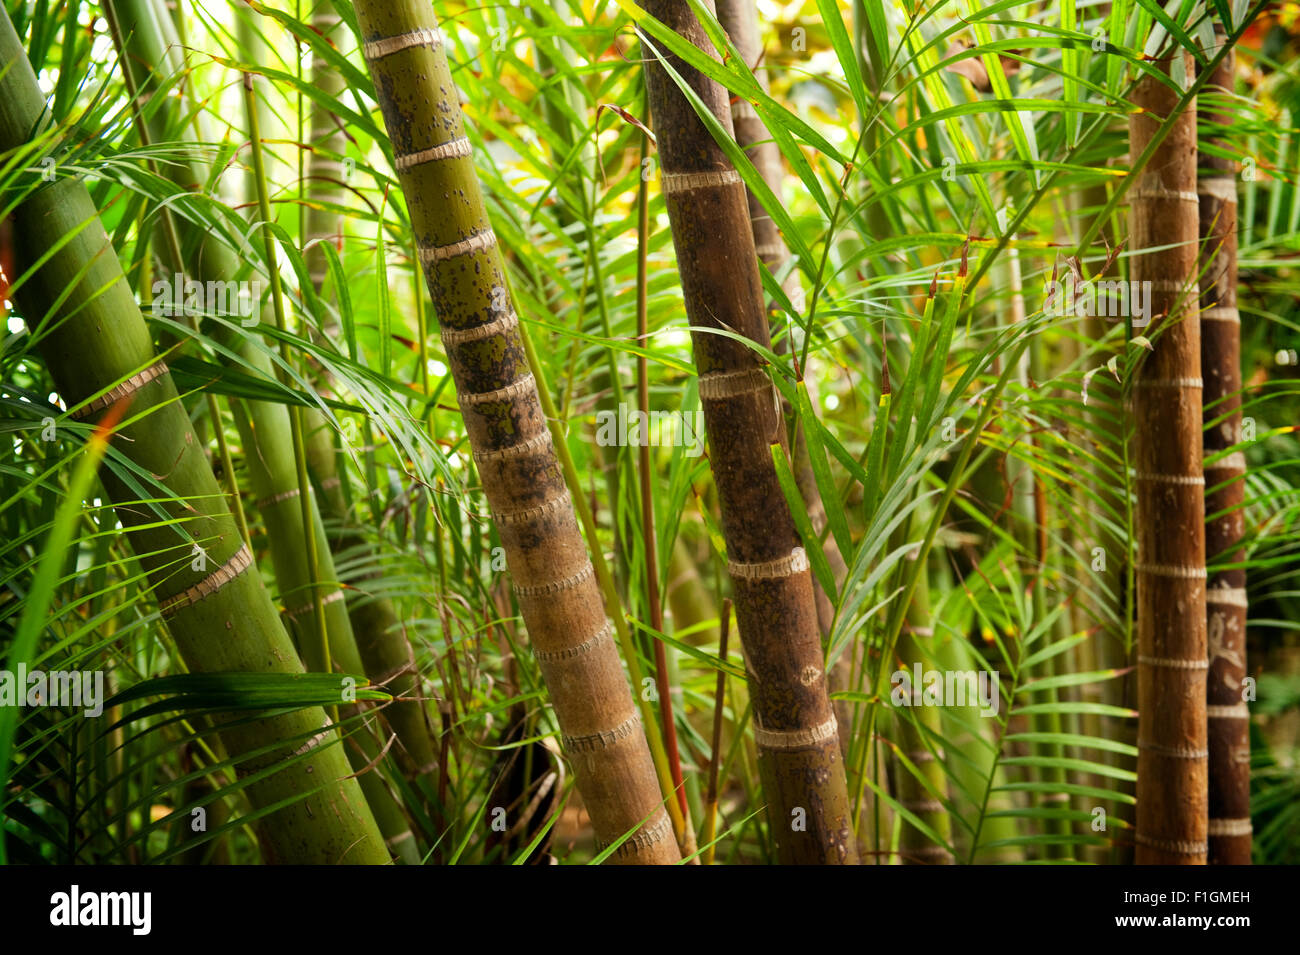 Picture of a tropical forest background Stock Photo